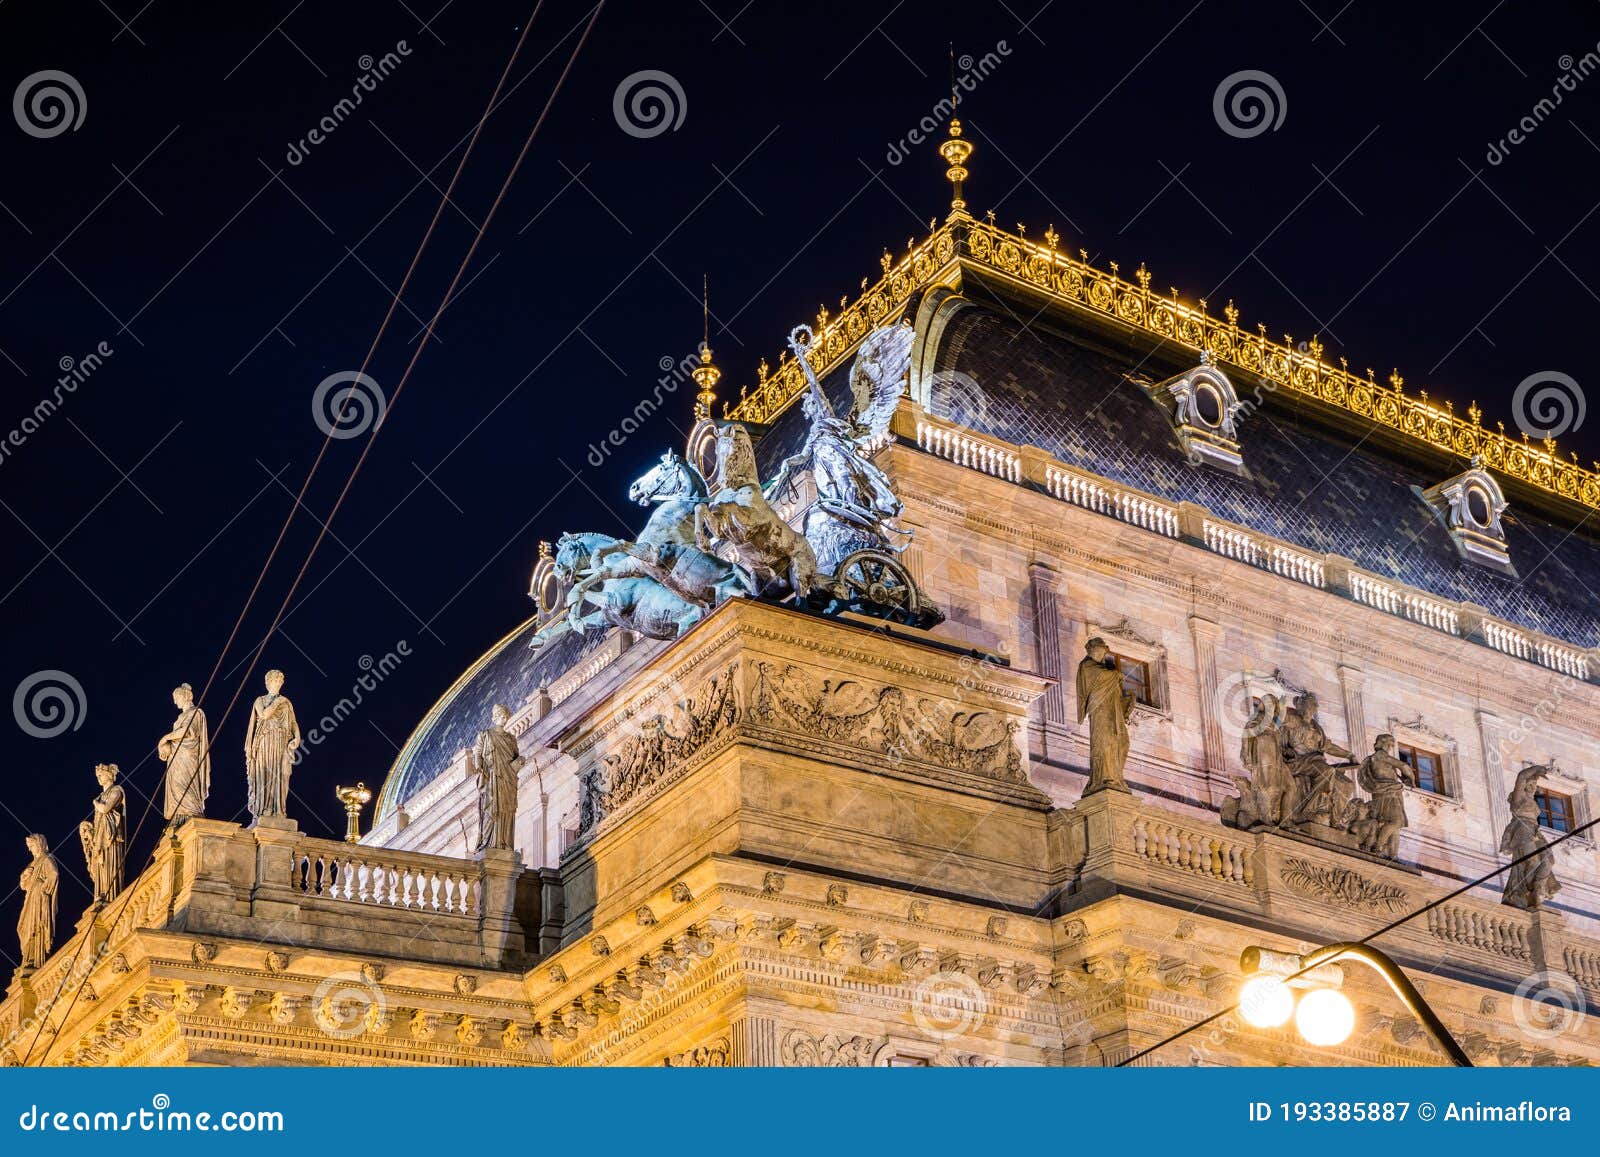 national theater in prague illuminated in the evening